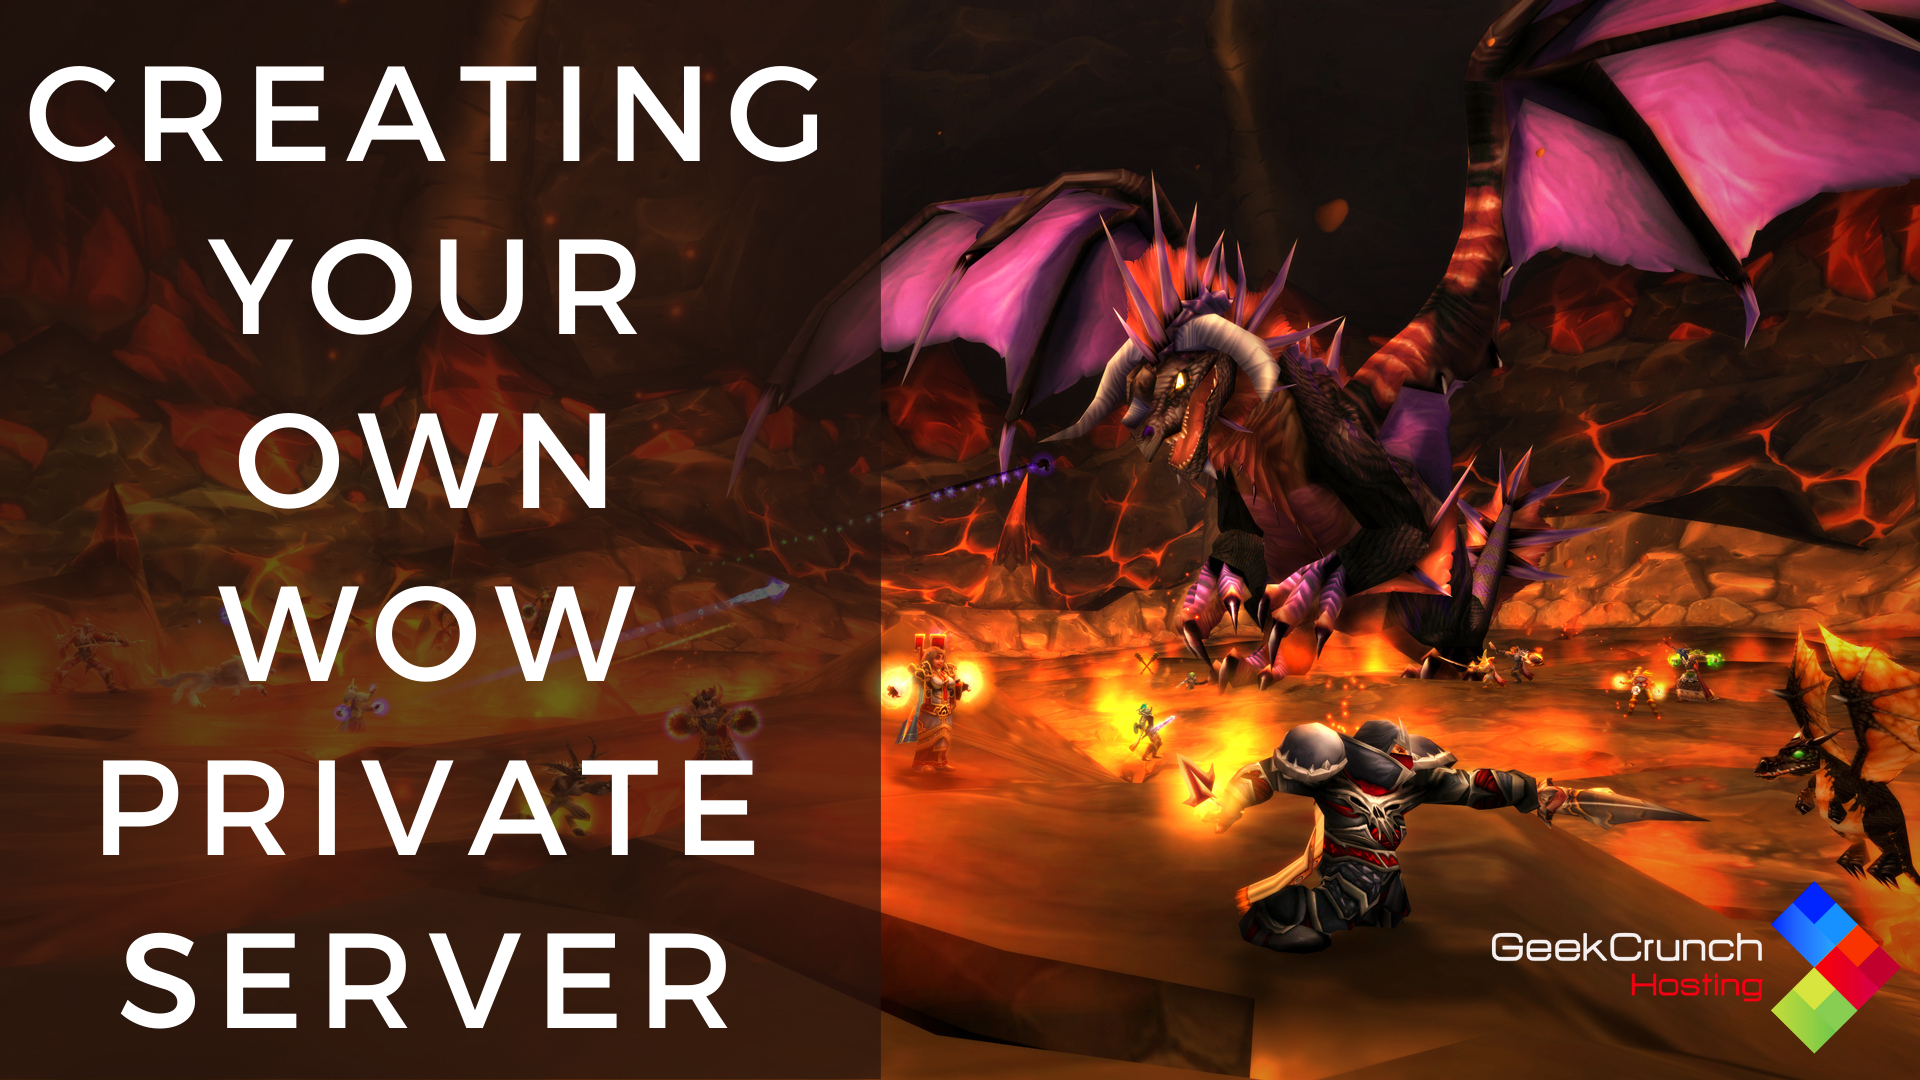 Behandling afstand Rød Creating your own WoW private server in 2020 - Geek Crunch Hosting